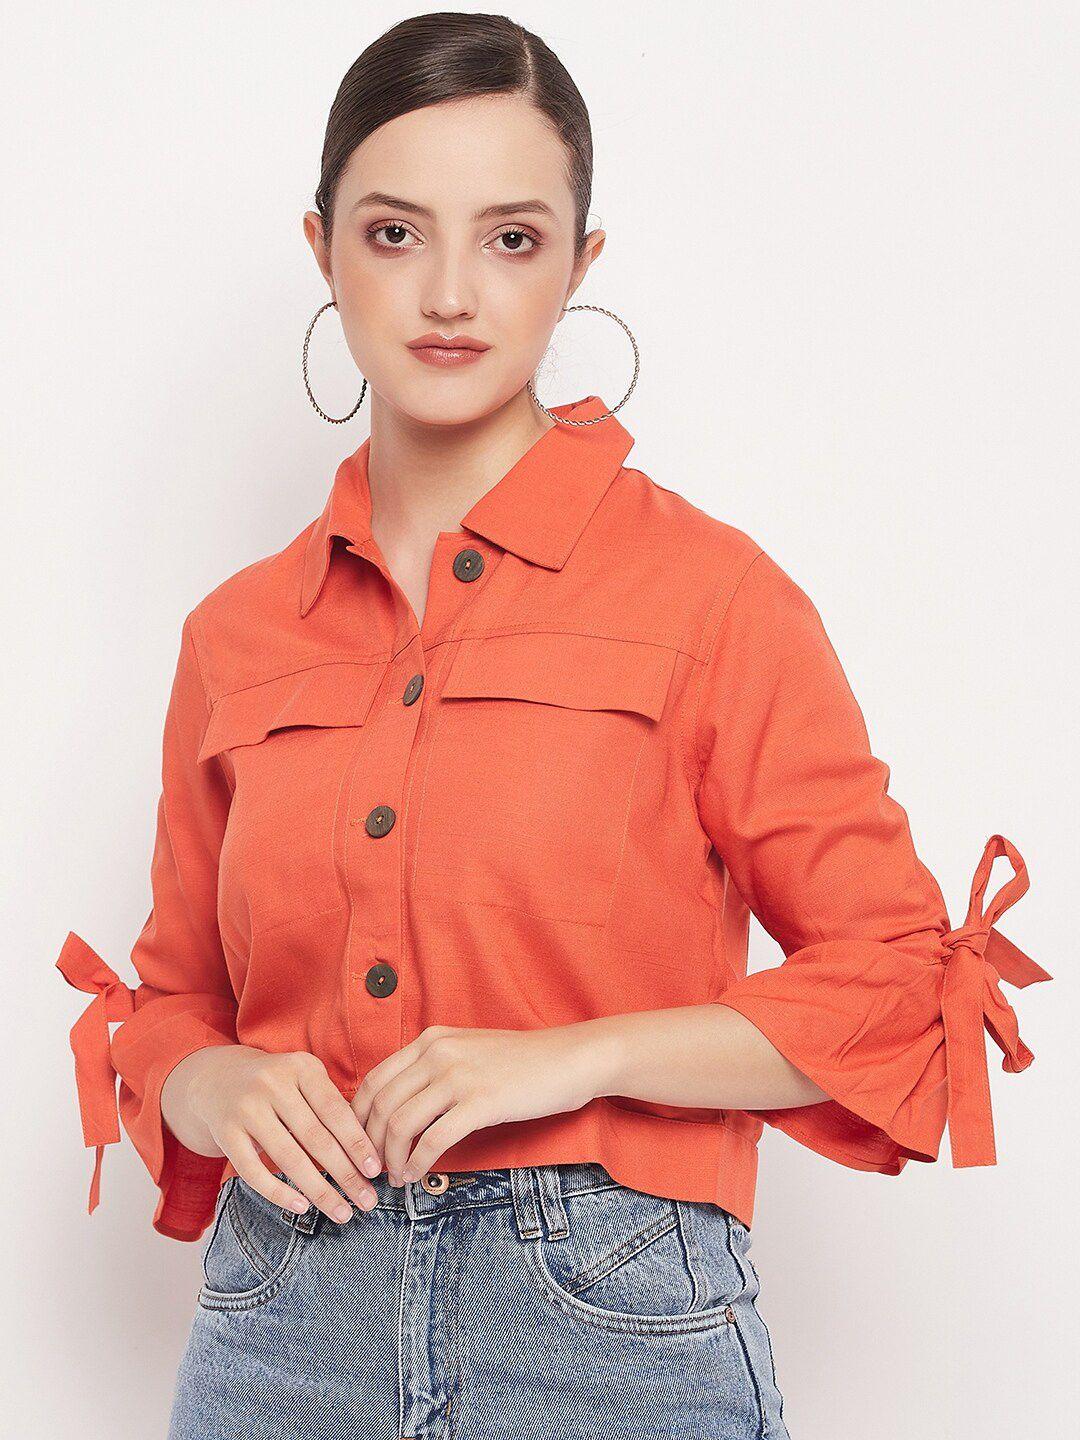 madame tie-up bell sleeves shirt style crop top